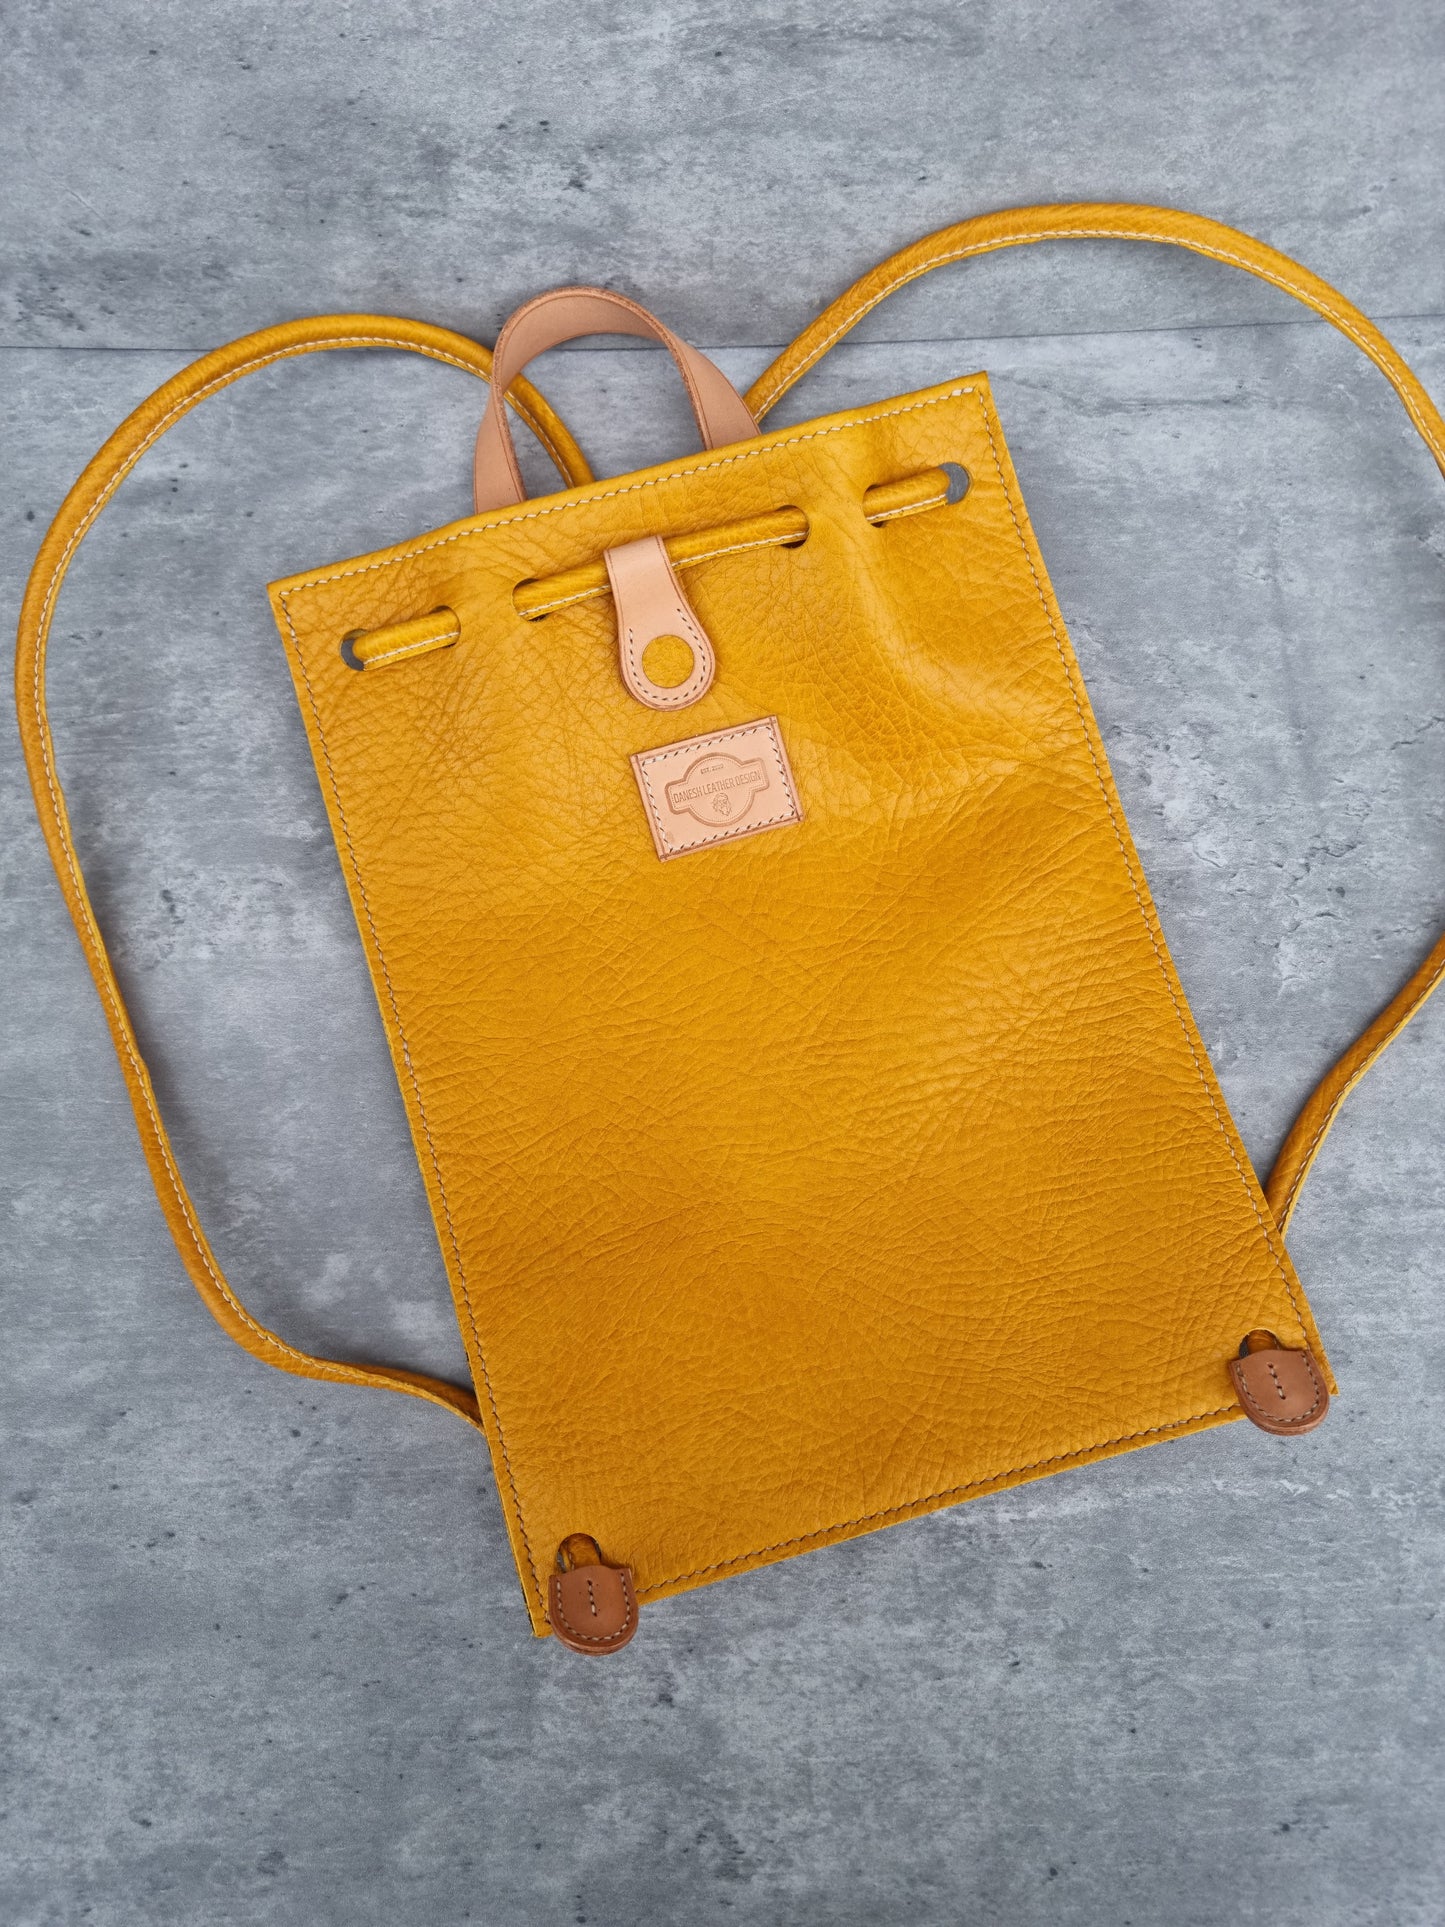 The Snor string bag | DIY | Pattern Pdf | Leather craft template